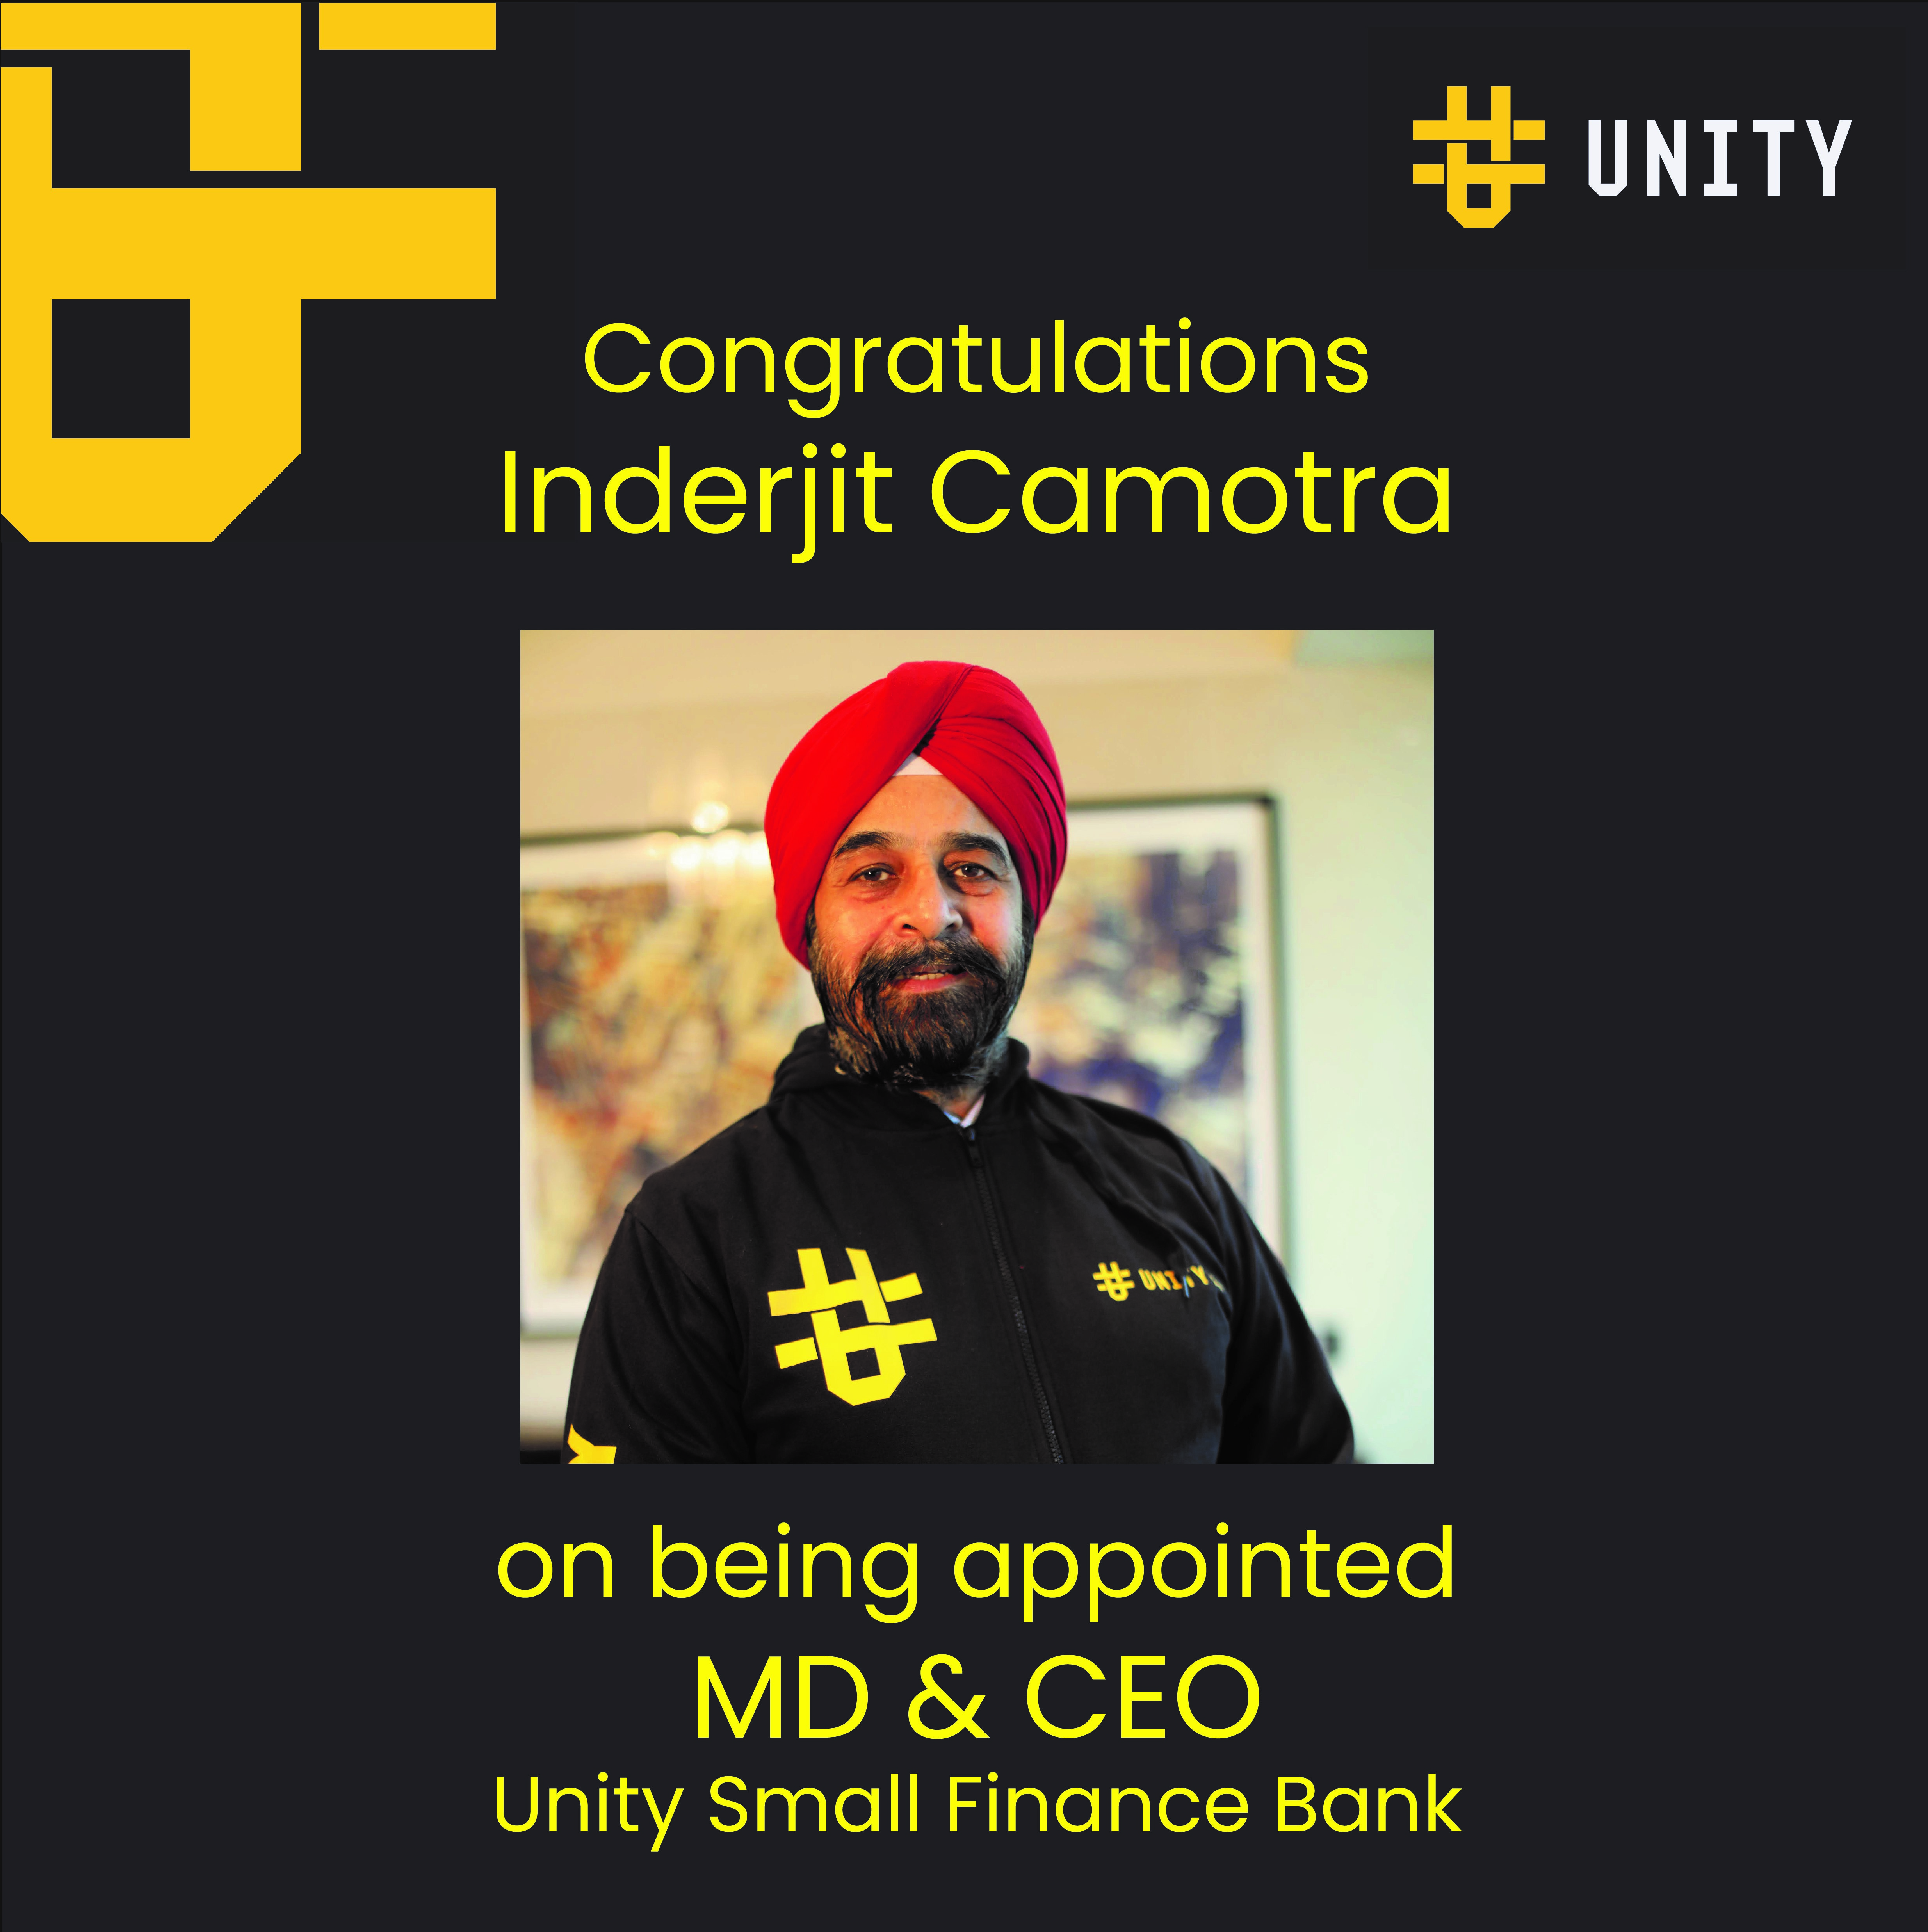 Inderjit Camotra appointed MD & CEO of Unity Small Finance Bank